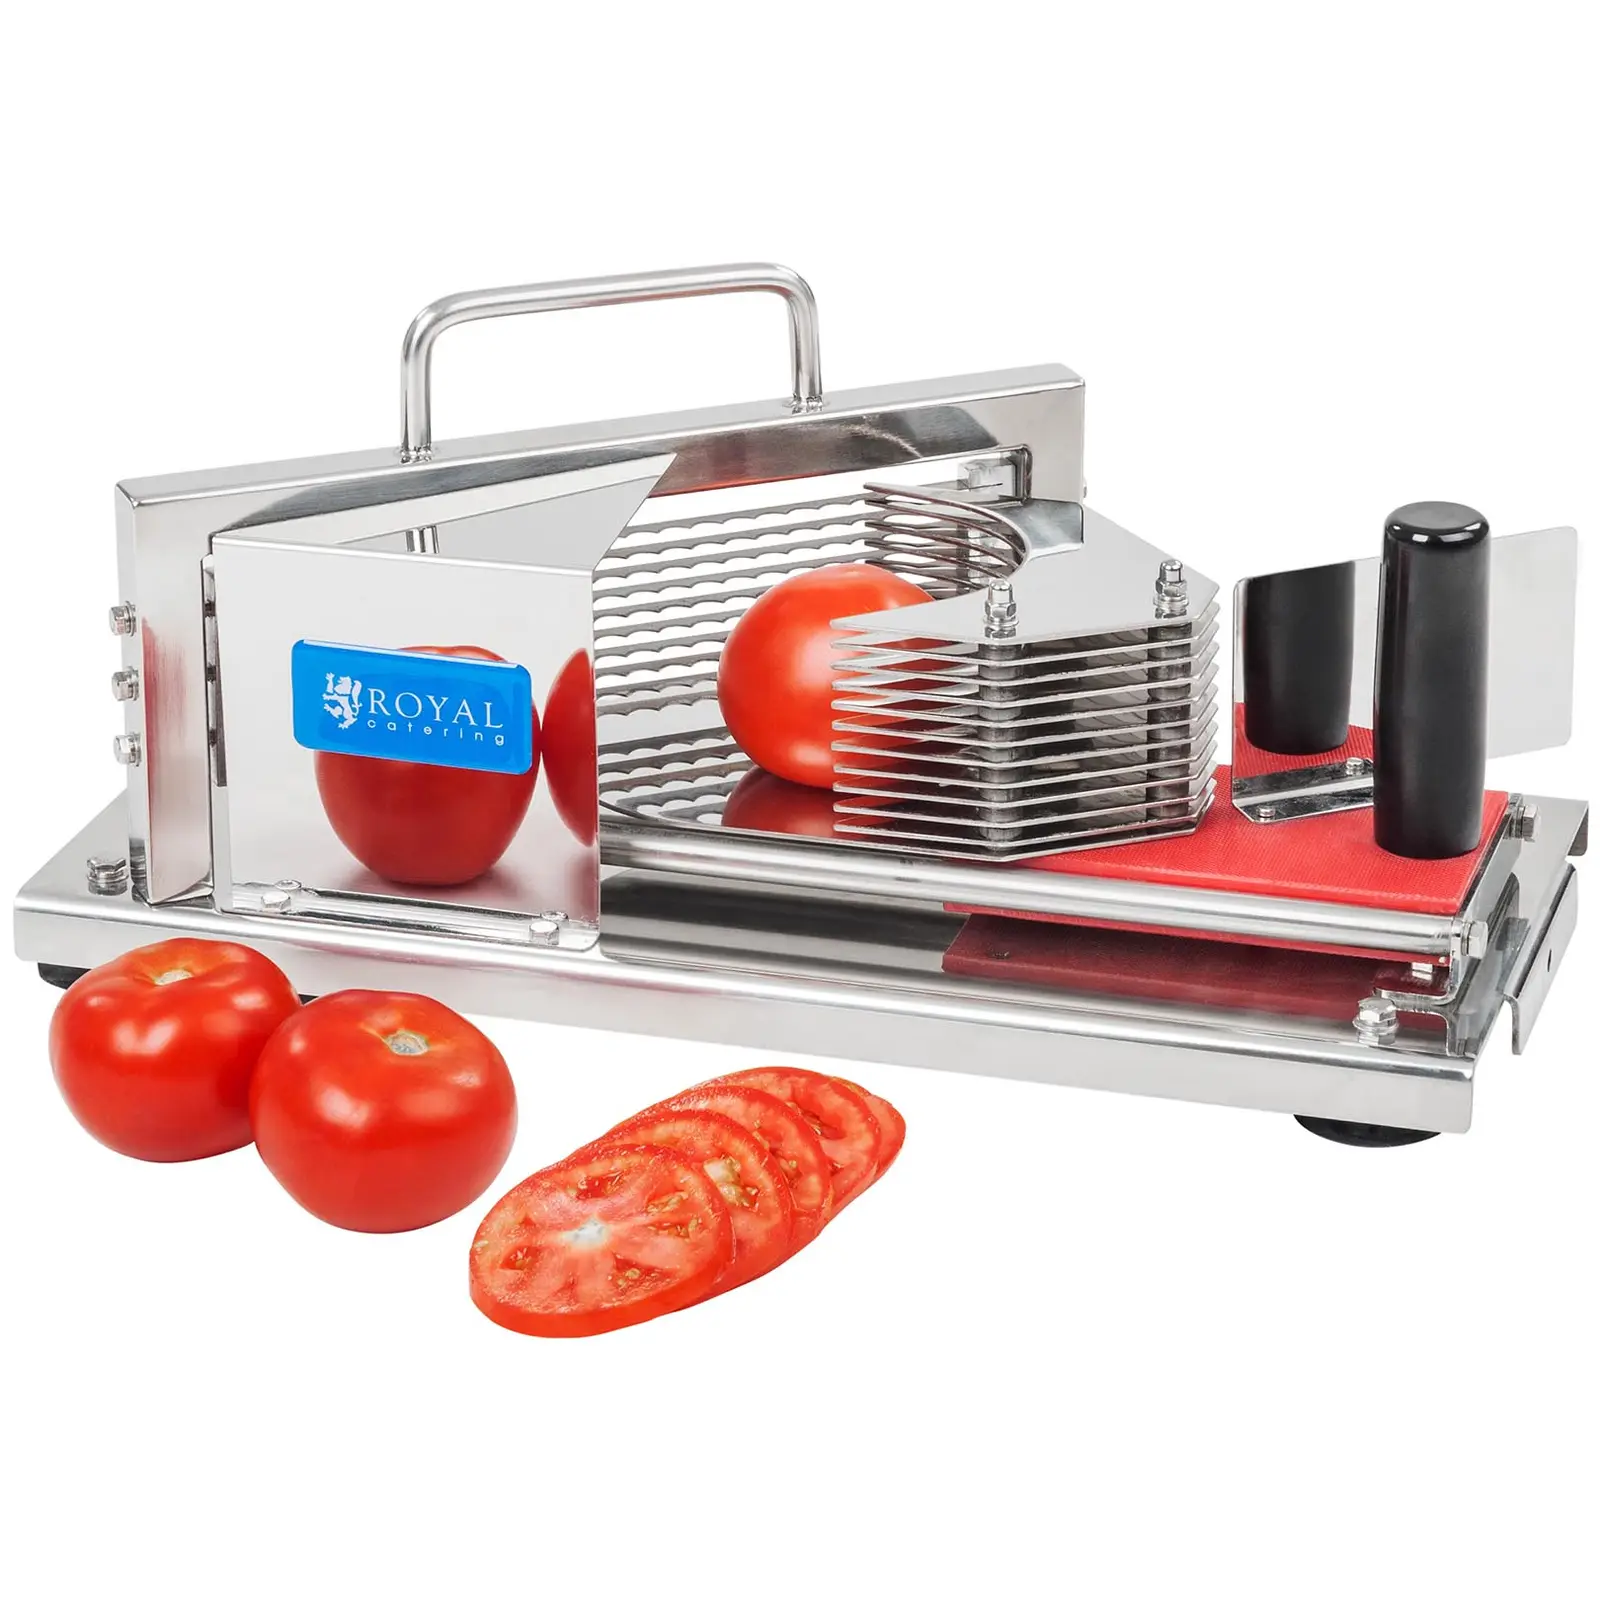 Tomato cutter - 5.5 mm slices